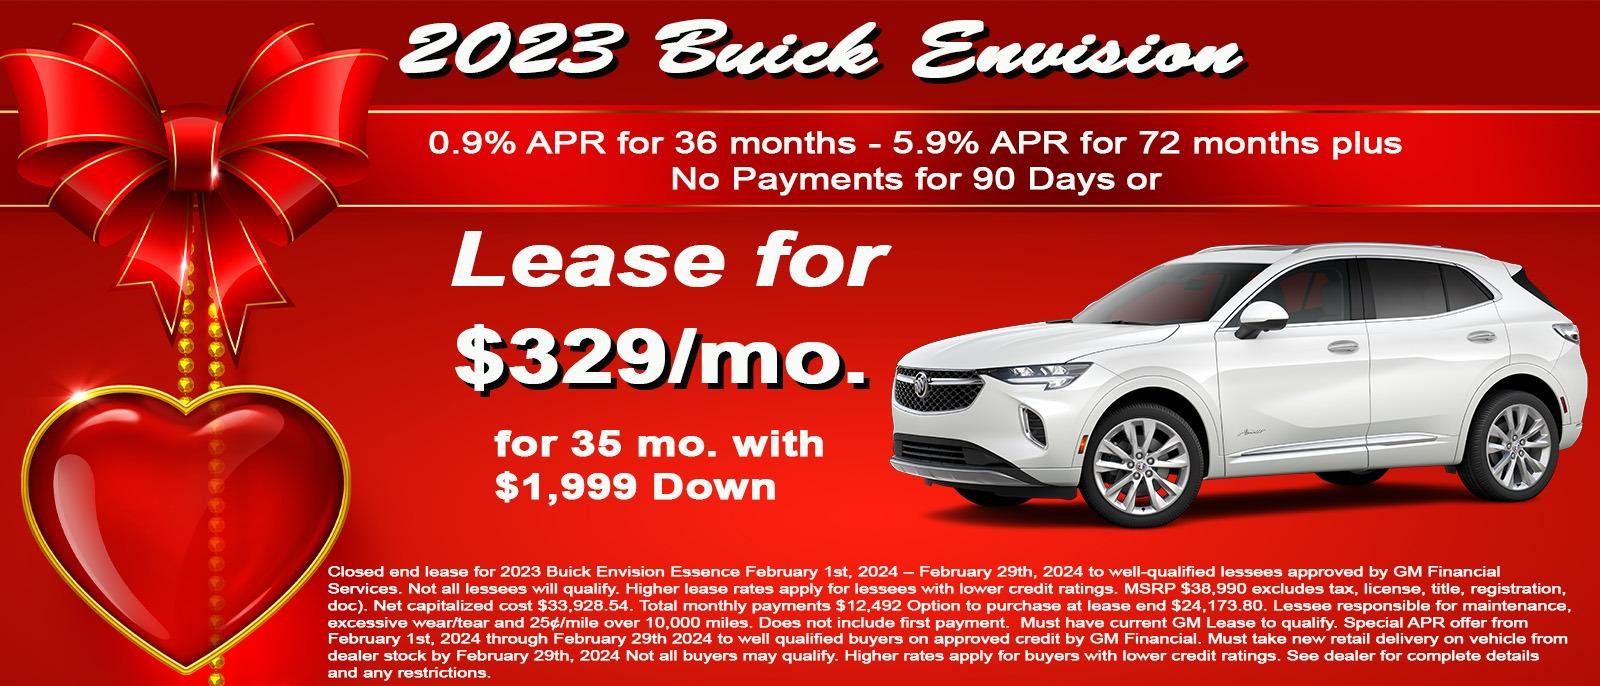 Lease your new Buick Envision for only $329/mo.